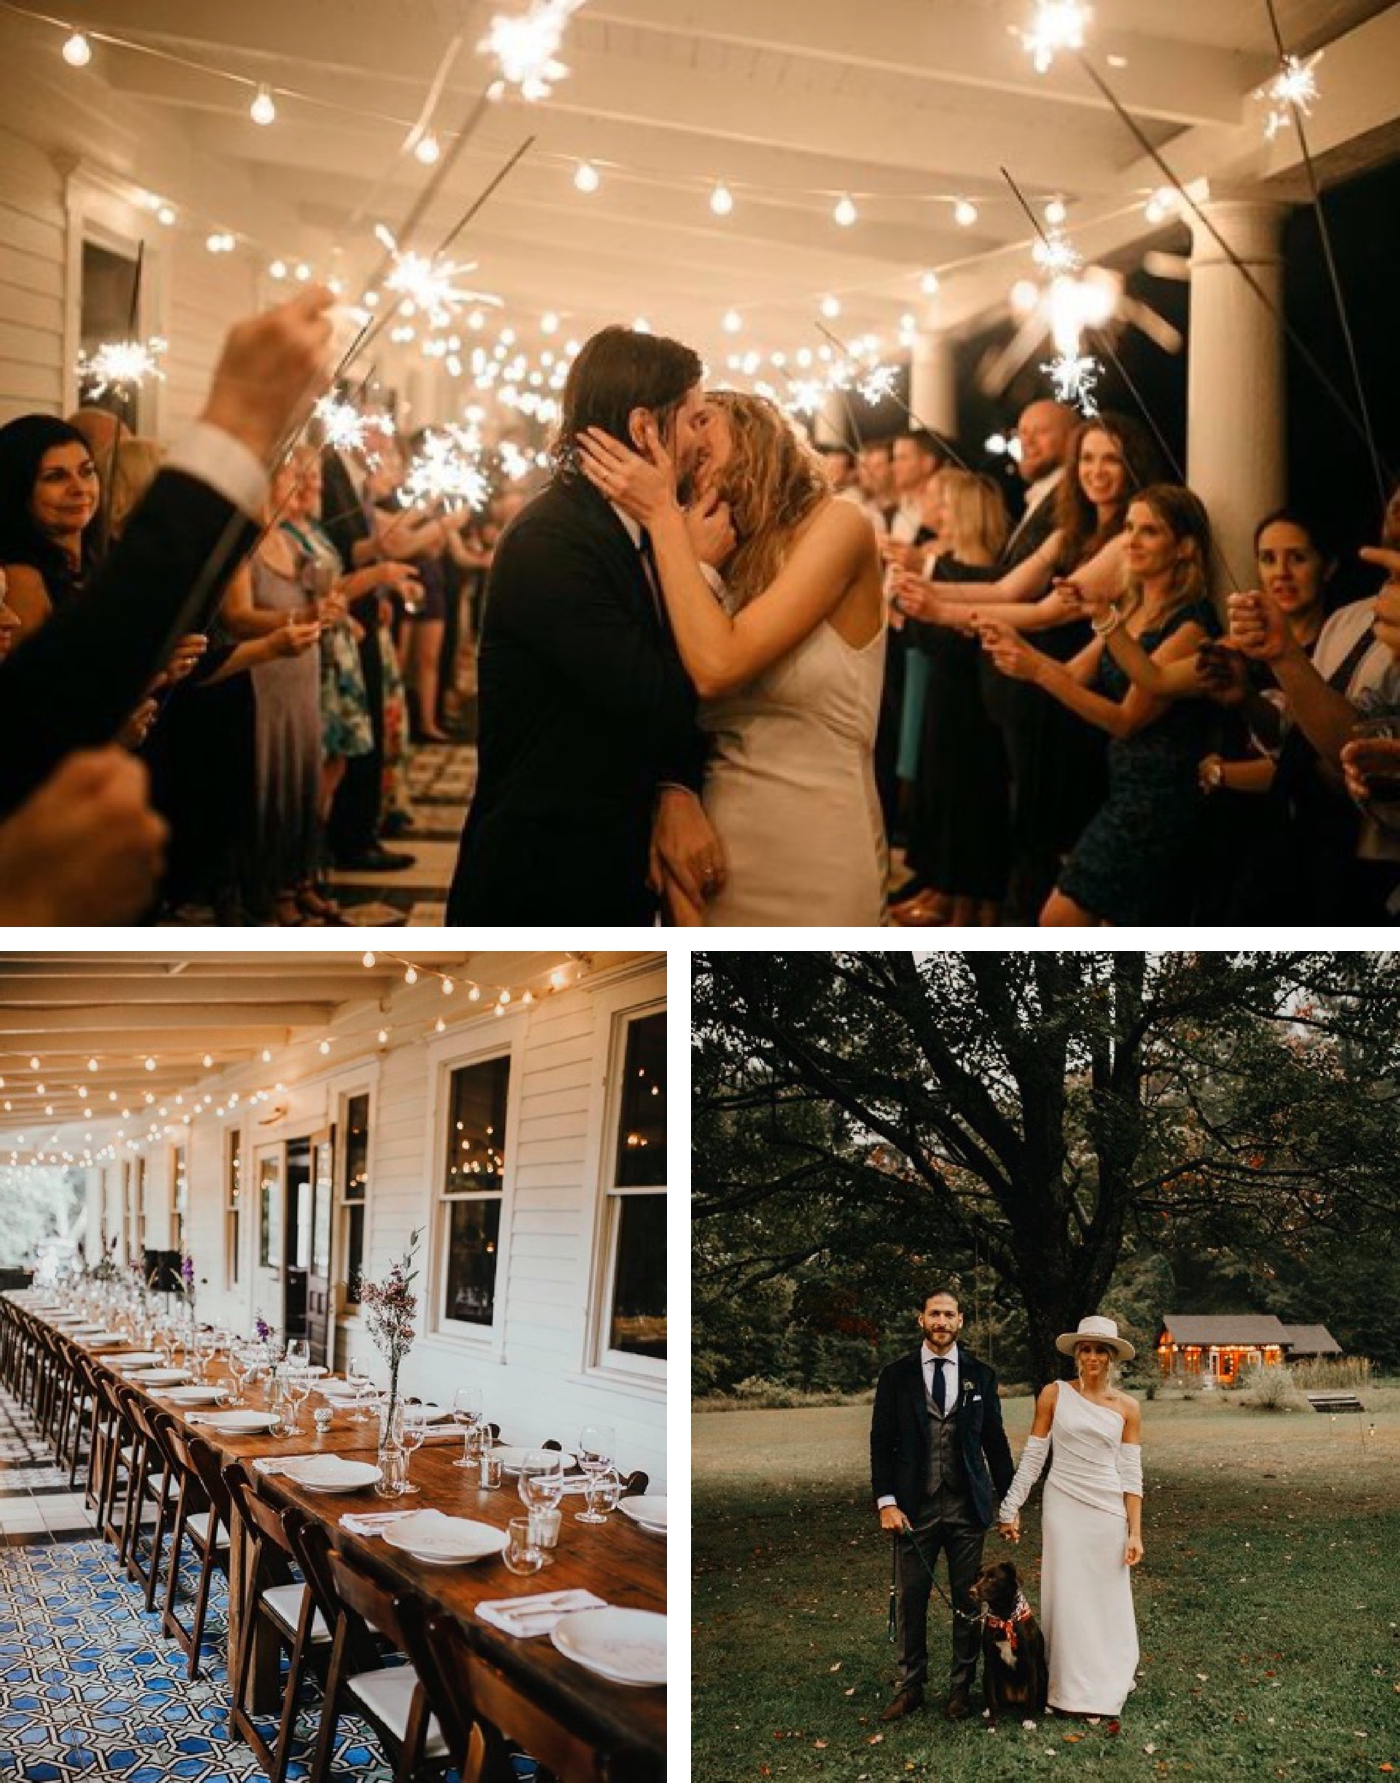 The 10 Most Intriguing Wedding Venues in Upstate New York 2020 | Foxfire Mountain House | Verve Event Co.